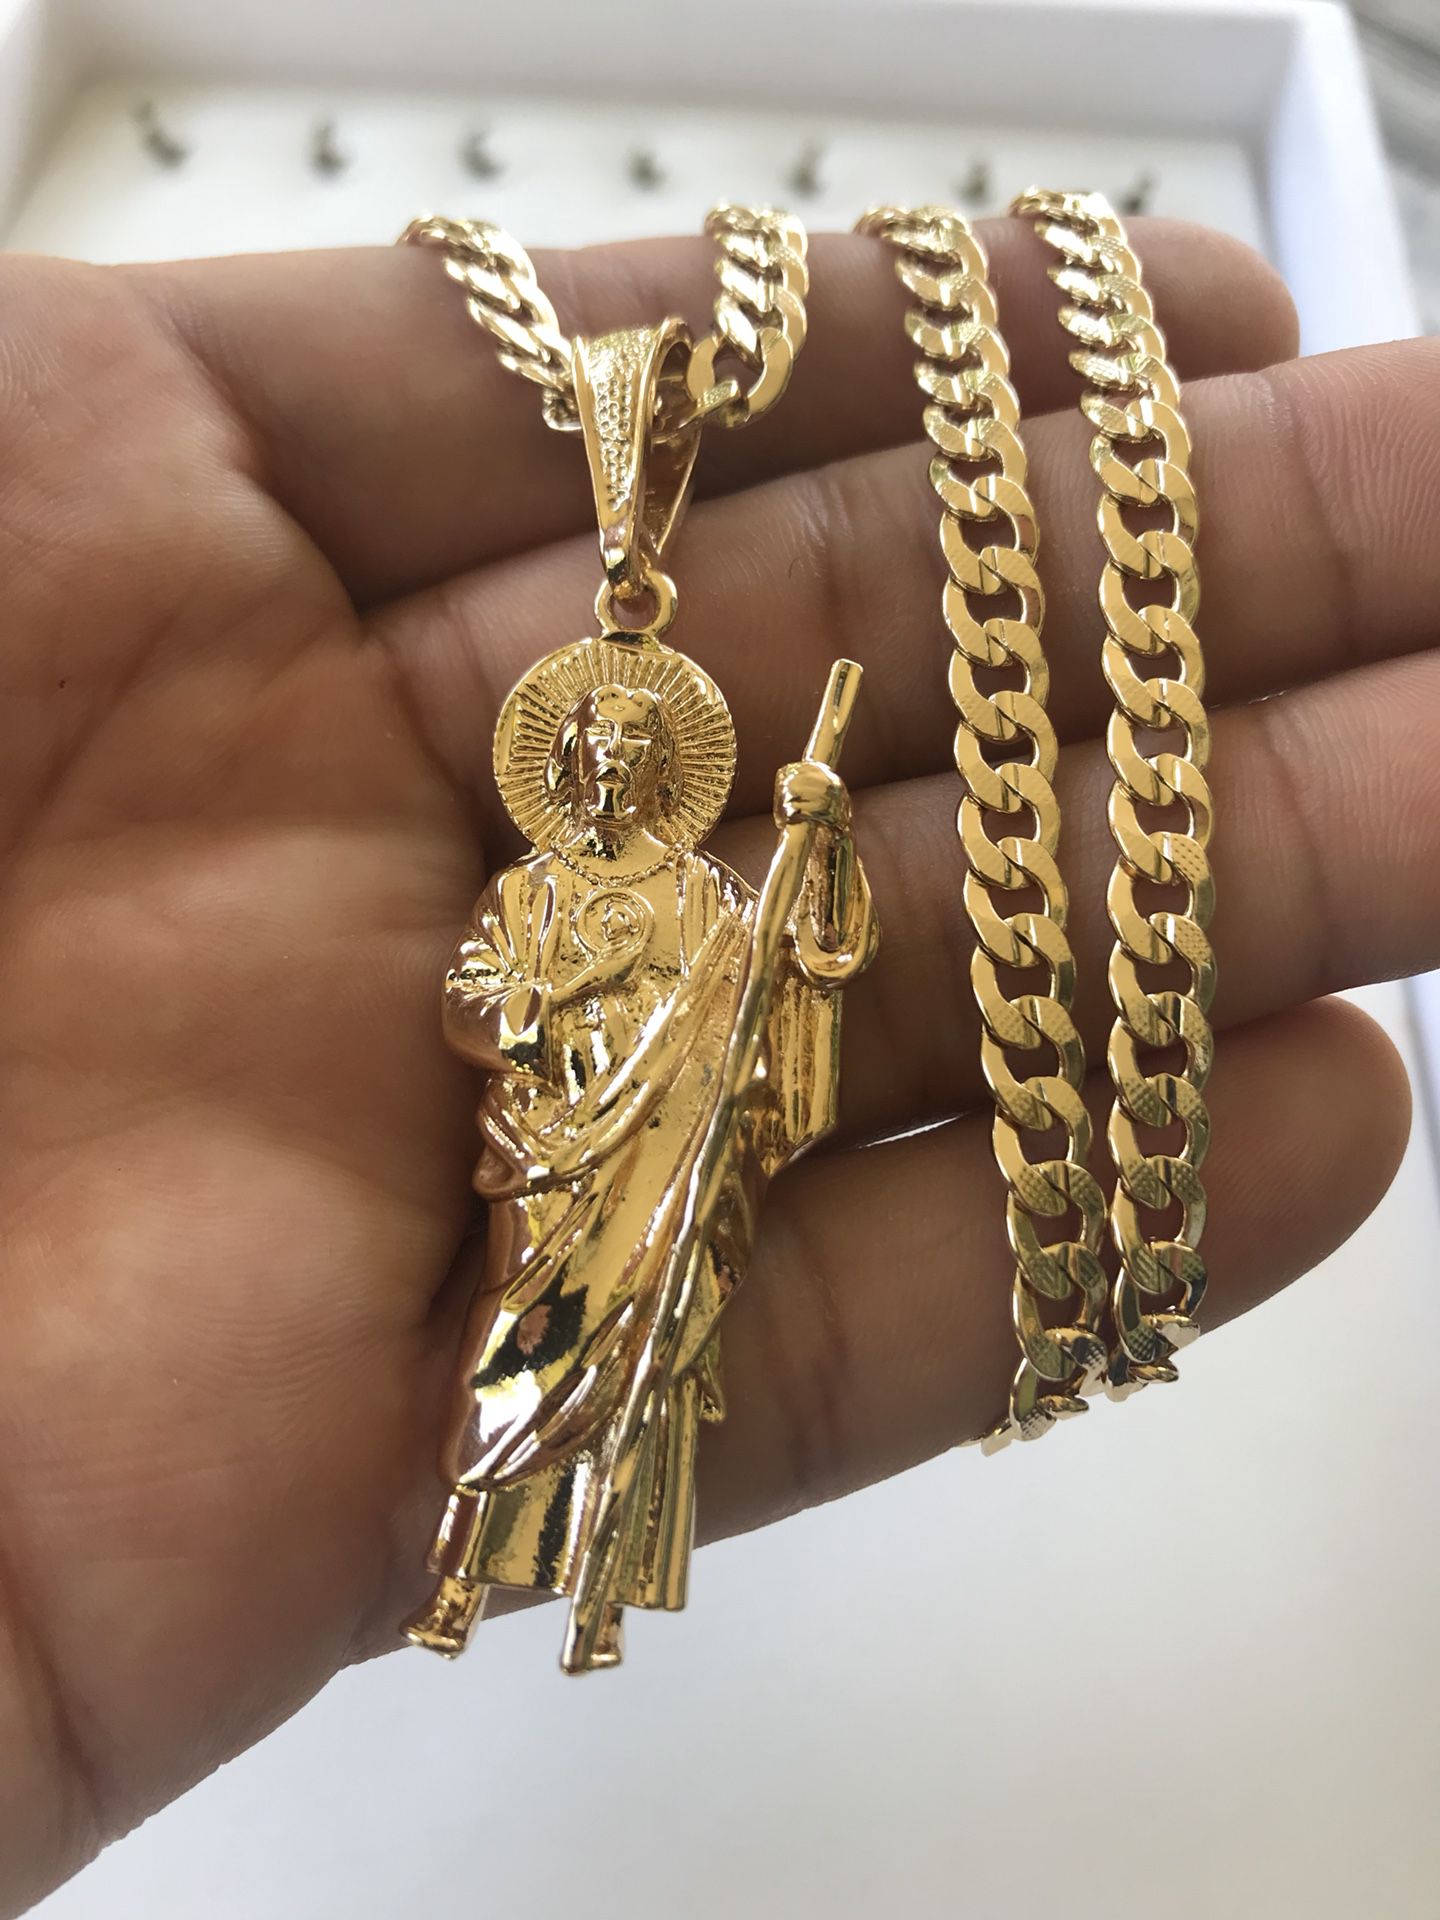 14k Gold filled Cuban link chain with San Judas charm